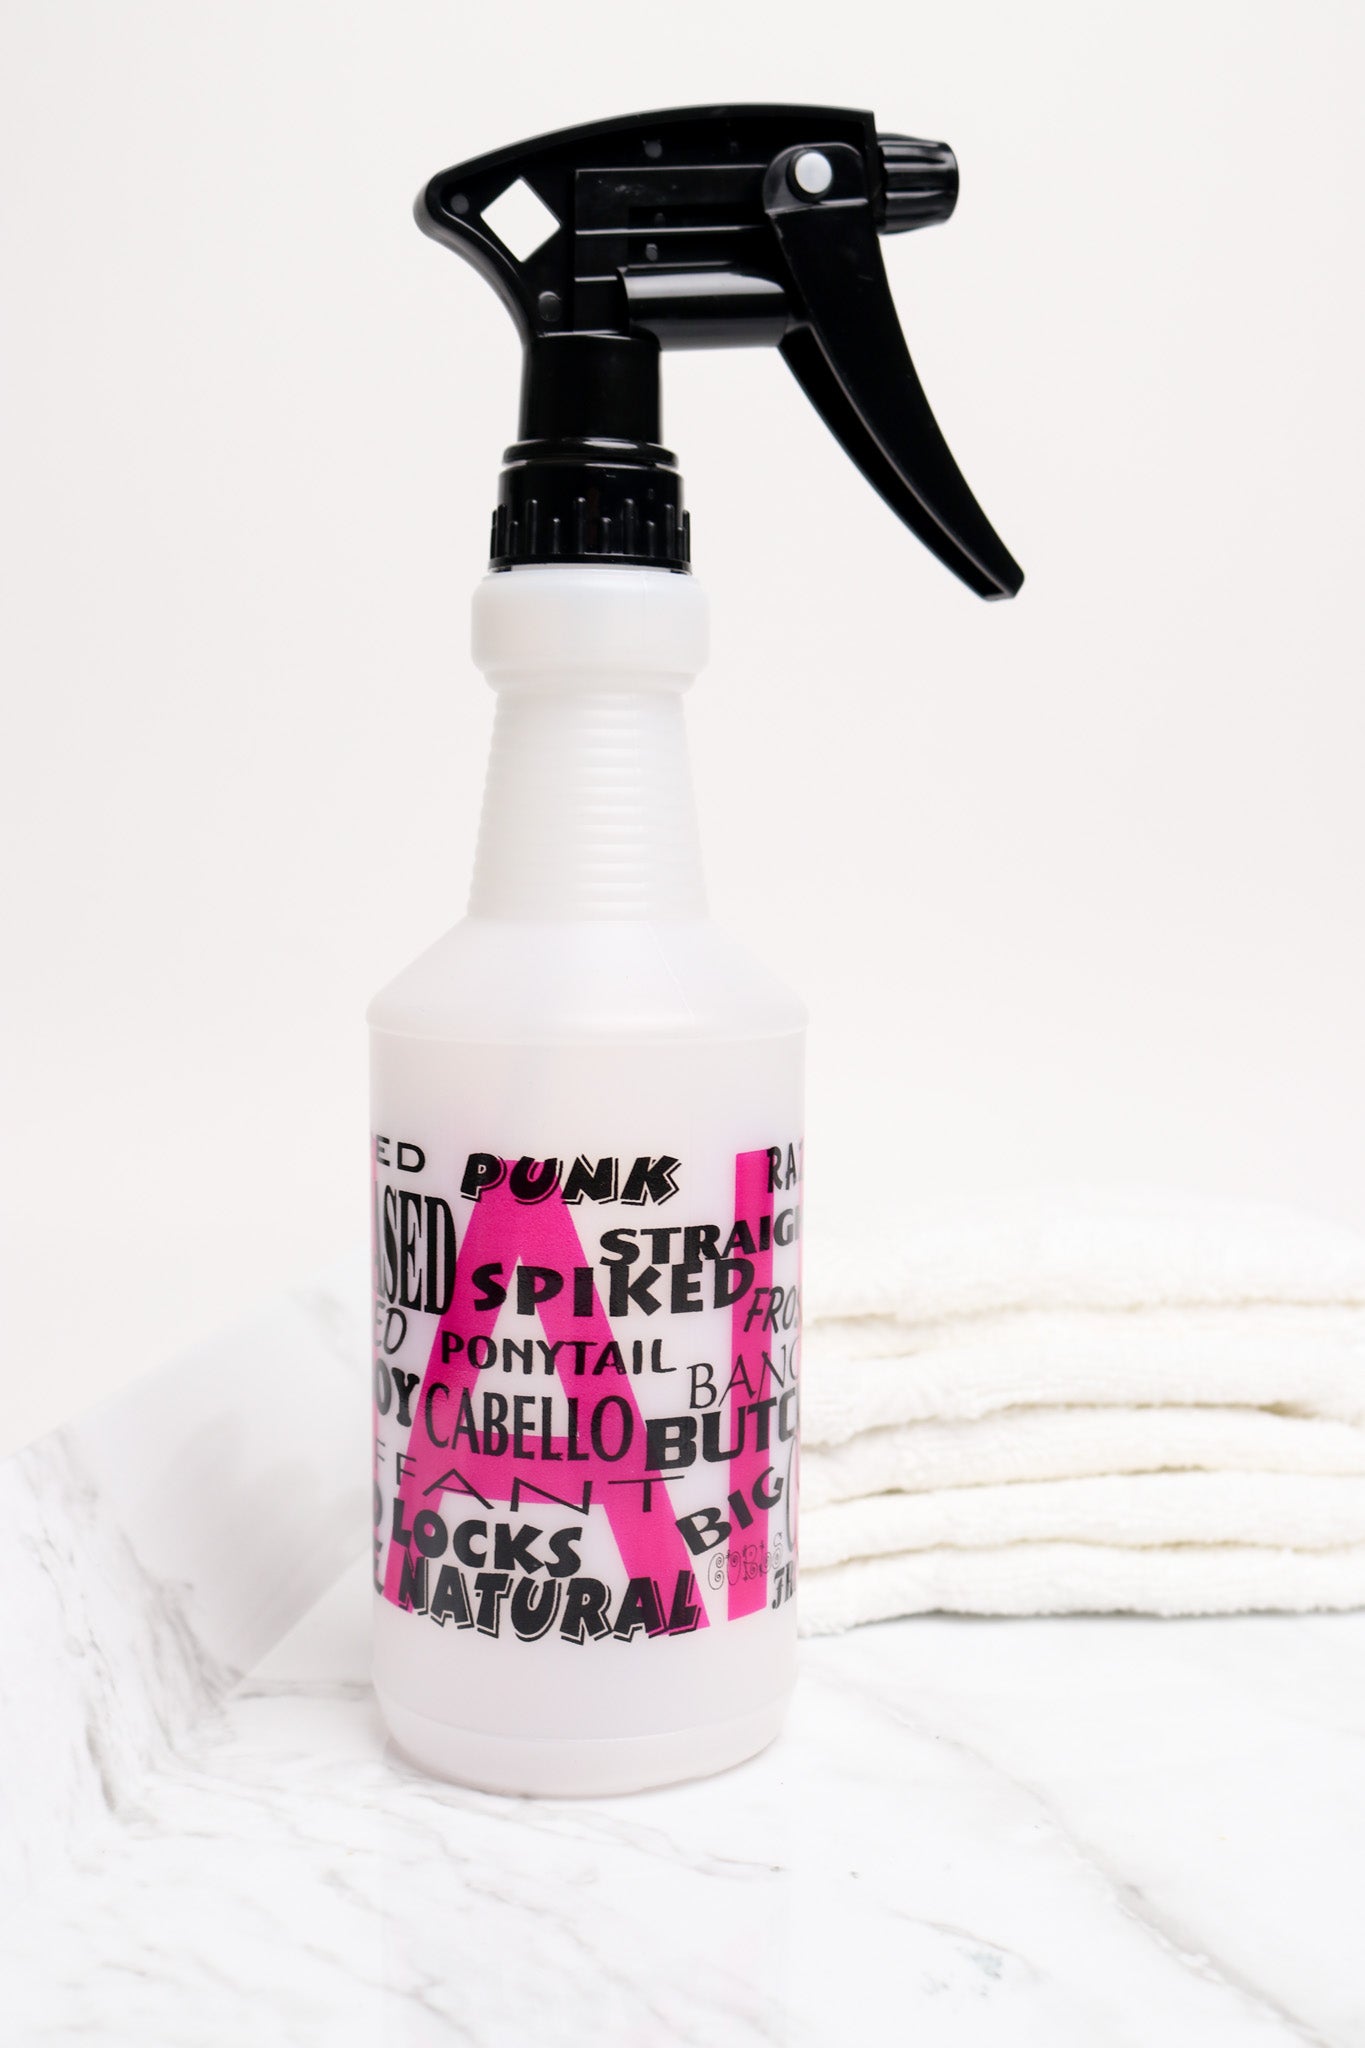 Works well as a Spritzer with our SID Leave In Conditioner; Just add enough for a single use, rinse, dry and stor